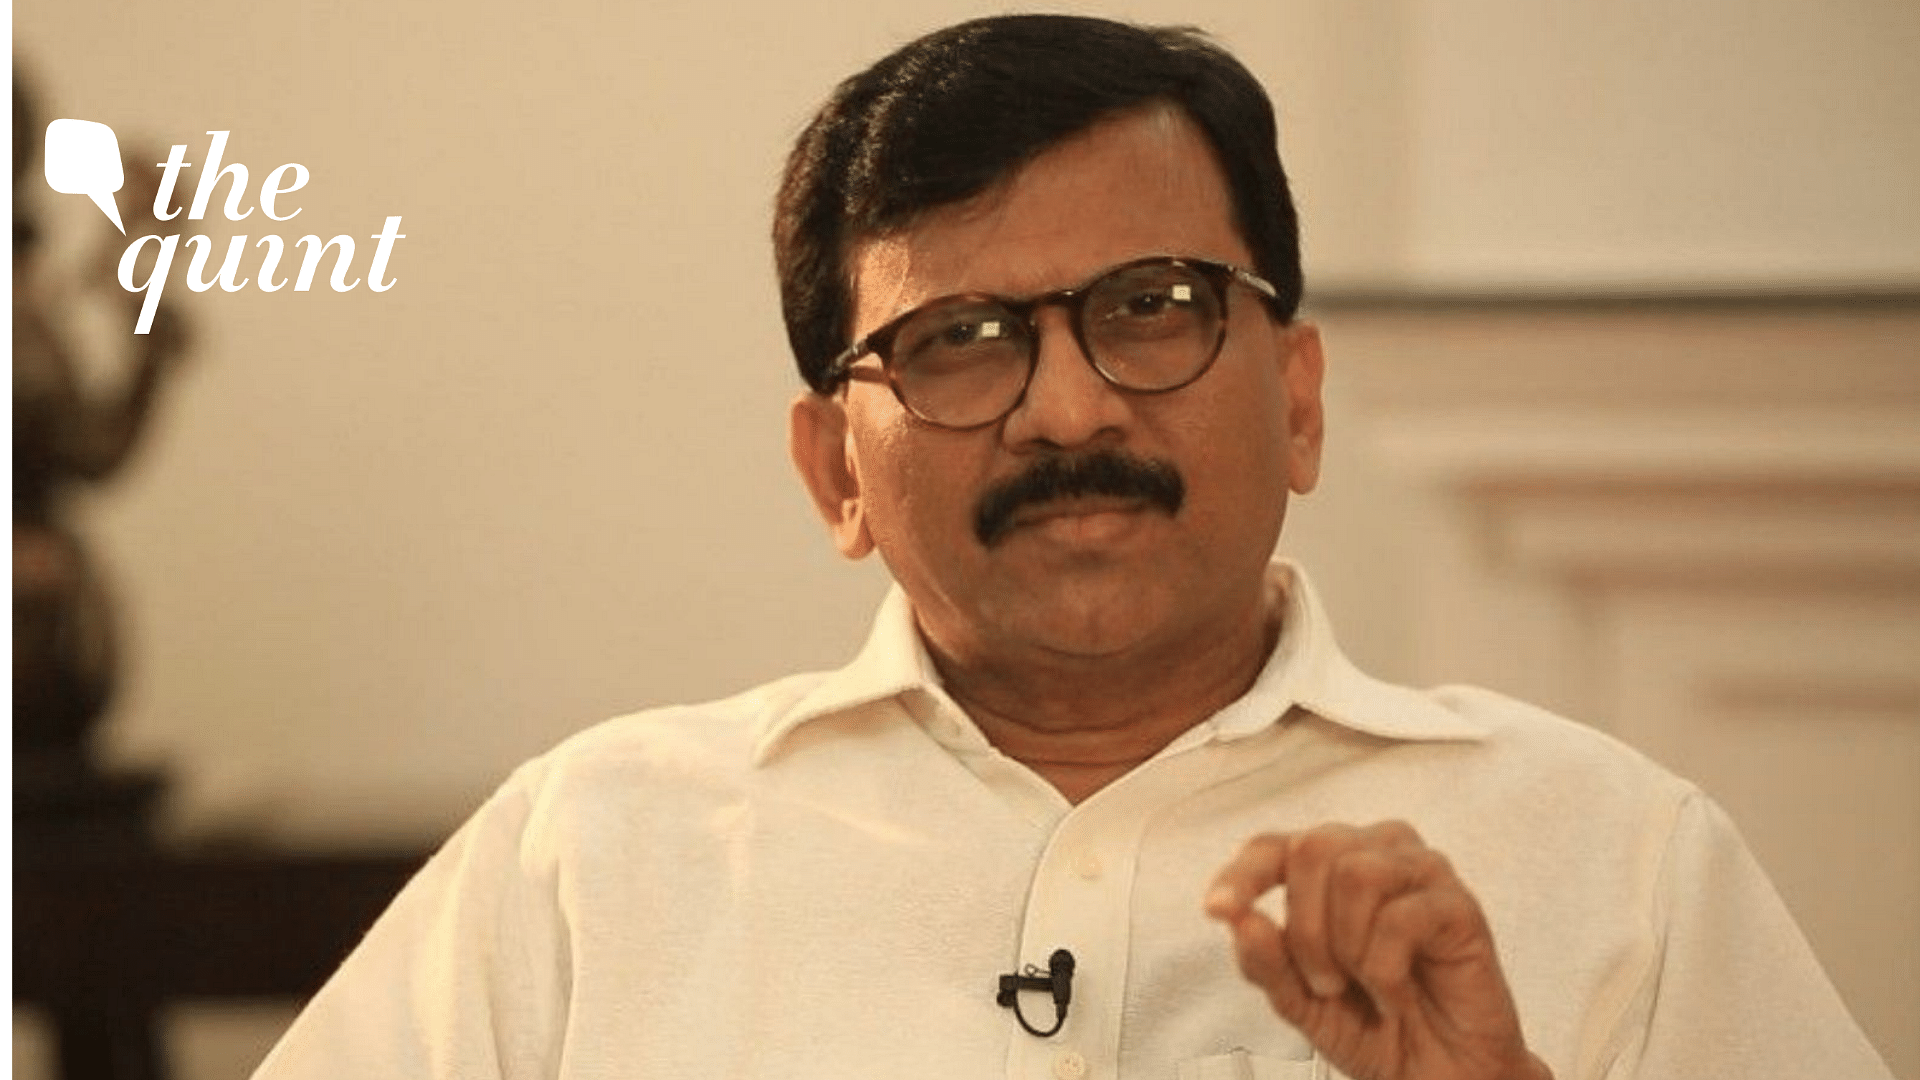 <div class="paragraphs"><p>Shiv Sena leader Sanjay Raut on Sunday, 25 July, raised questions about the <a href="https://www.thequint.com/tech-and-auto/tech-news/use-of-spyware-against-civil-society-journos-concerning-us-on-pegasus-row#read-more">recently-surfaced Pegasus spyware reports</a>.</p></div>